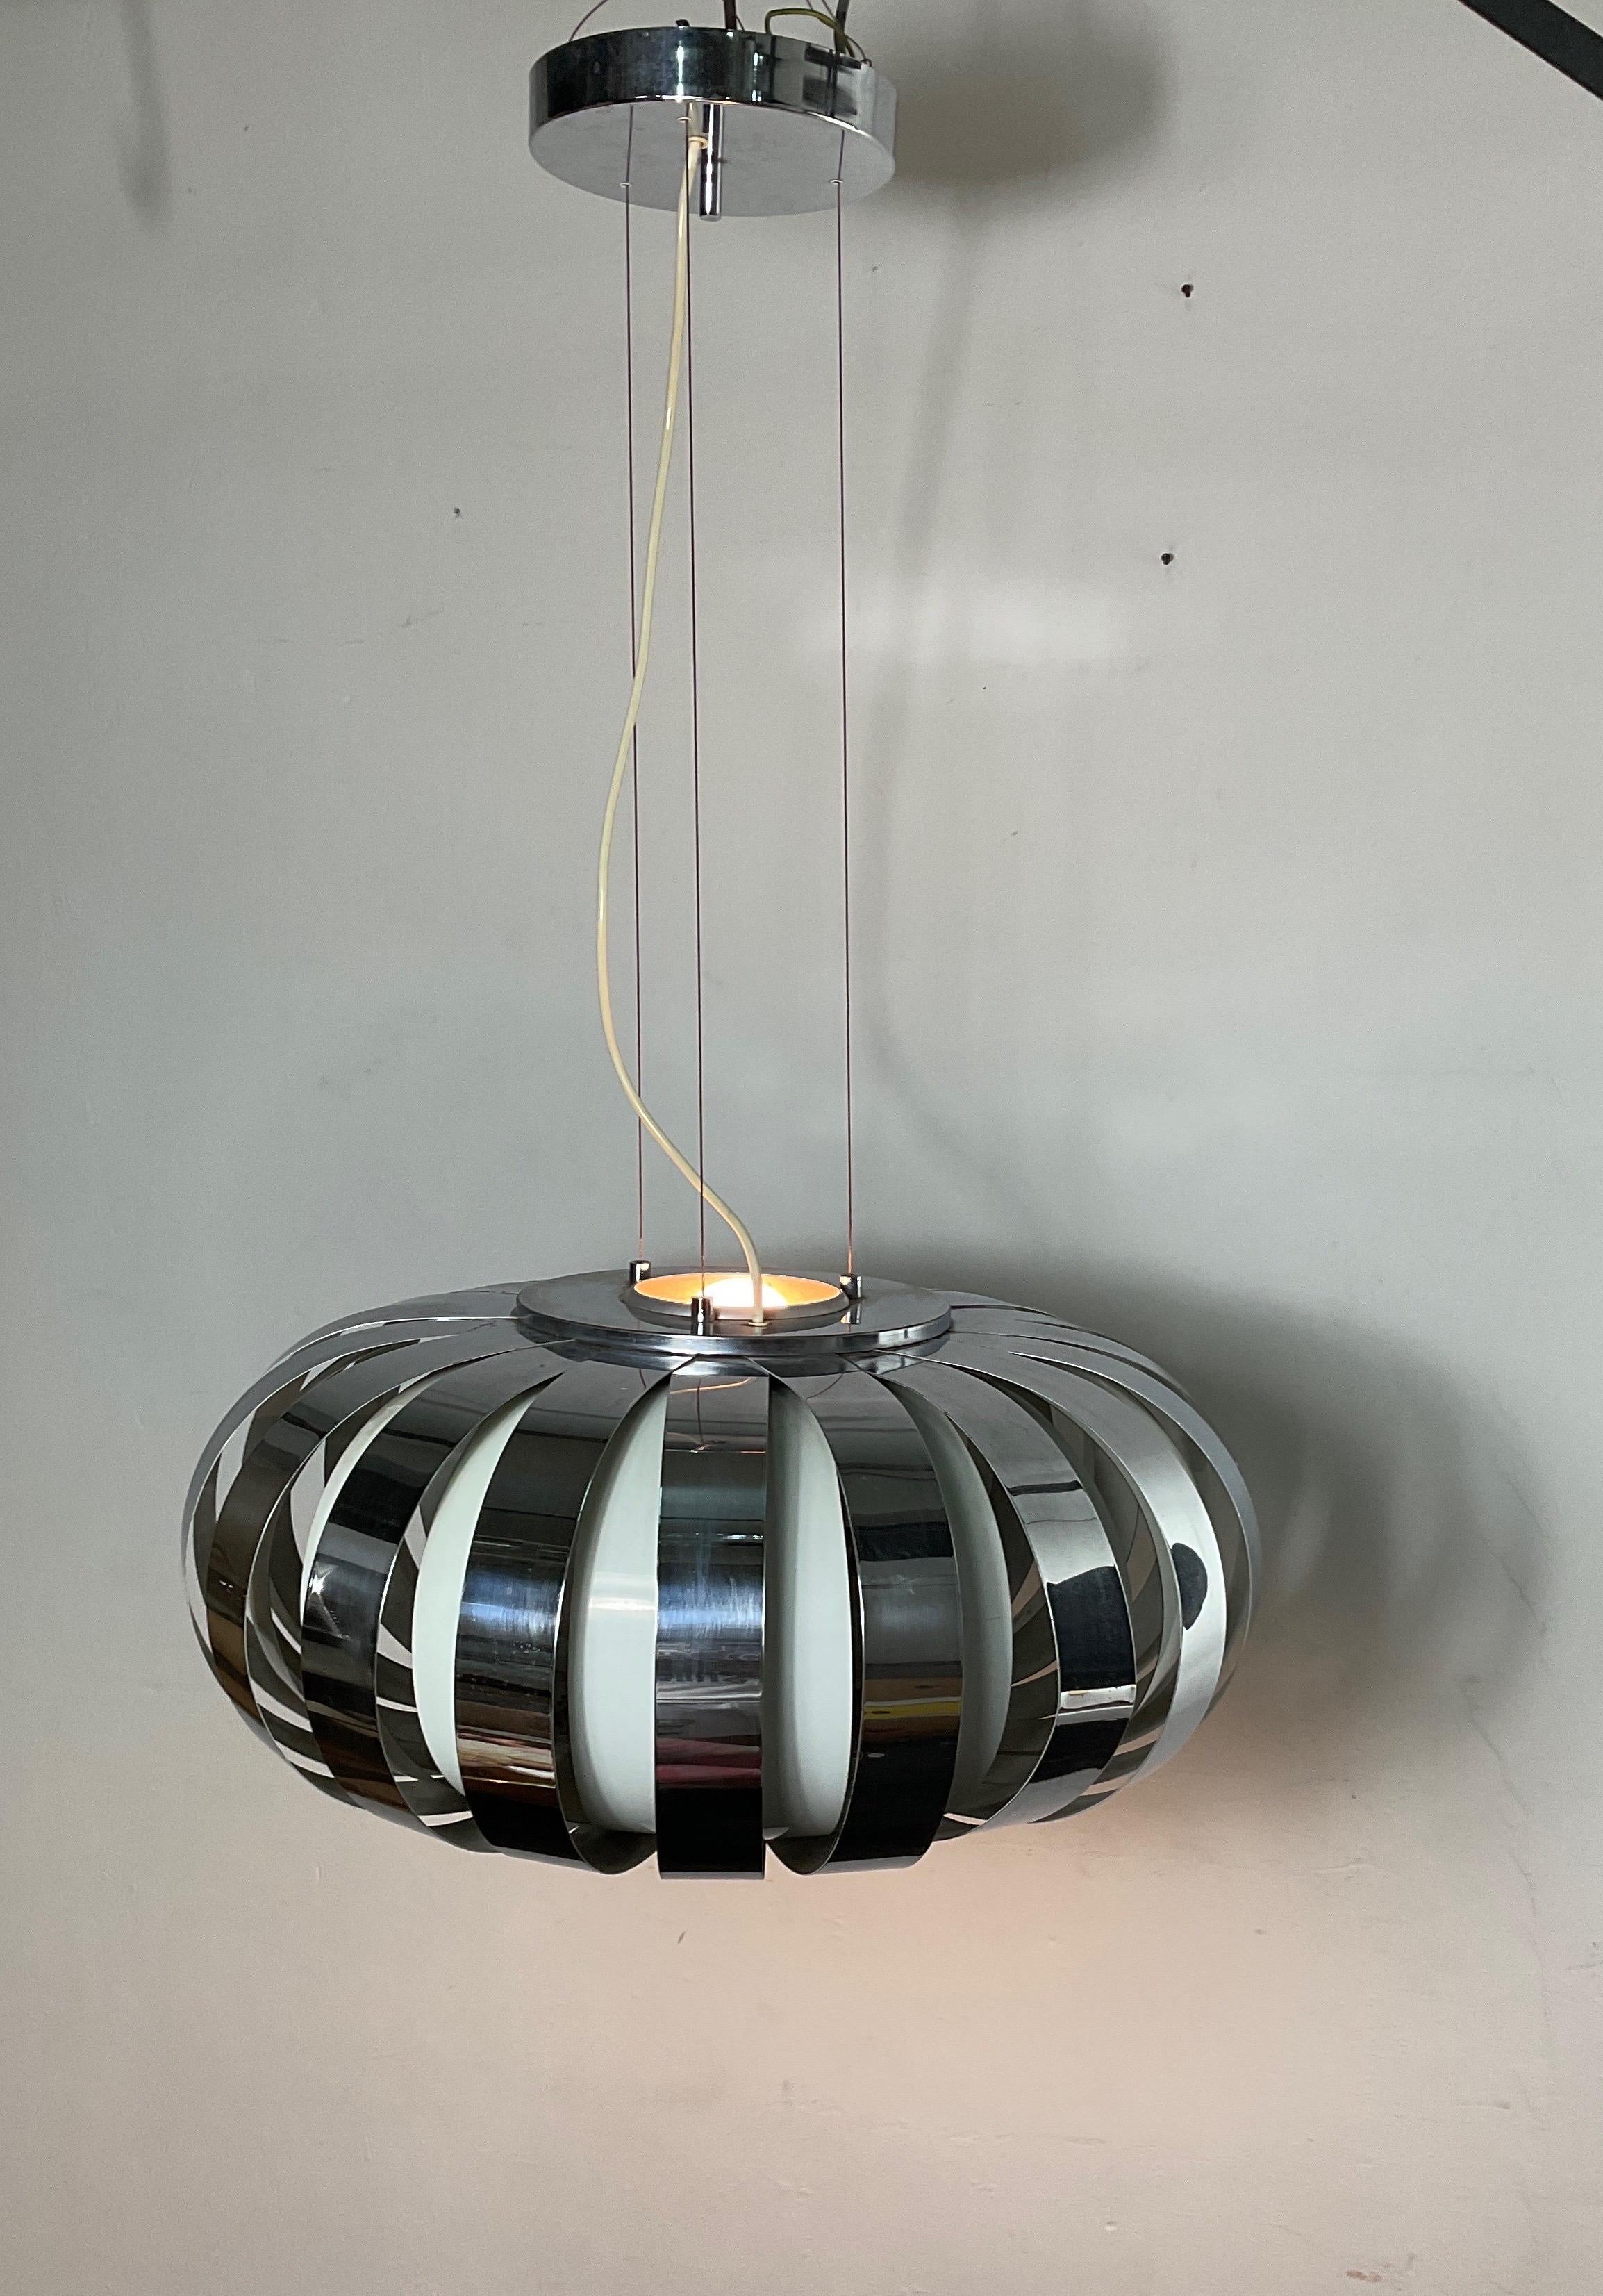 Space-age chandelier in chrome and lacquered steel from the 70s. With circular shape and measures 100 cm in height and 73 cm in diameter. The chandelier is in good condition with small wear and tear caused by both years and use. coloured plastics